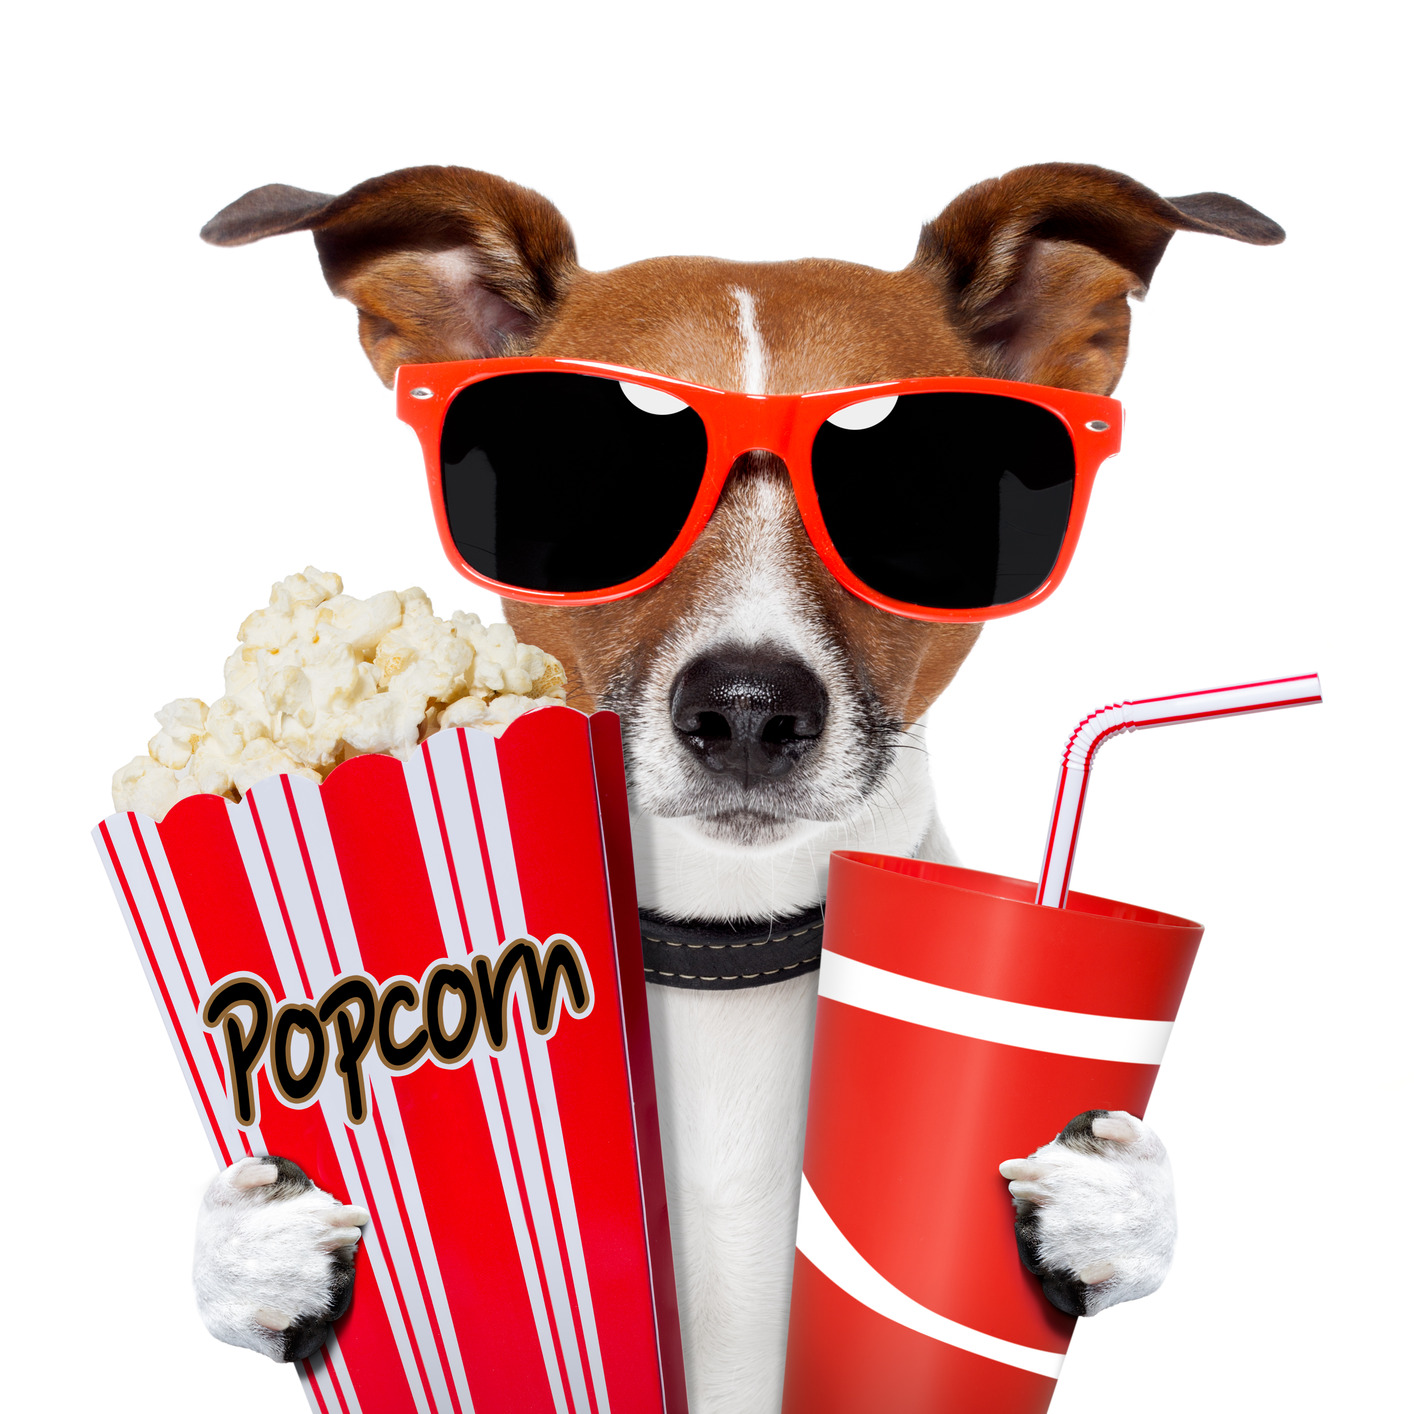 Movie Night Clipart   Clipart Panda   Free Clipart Images